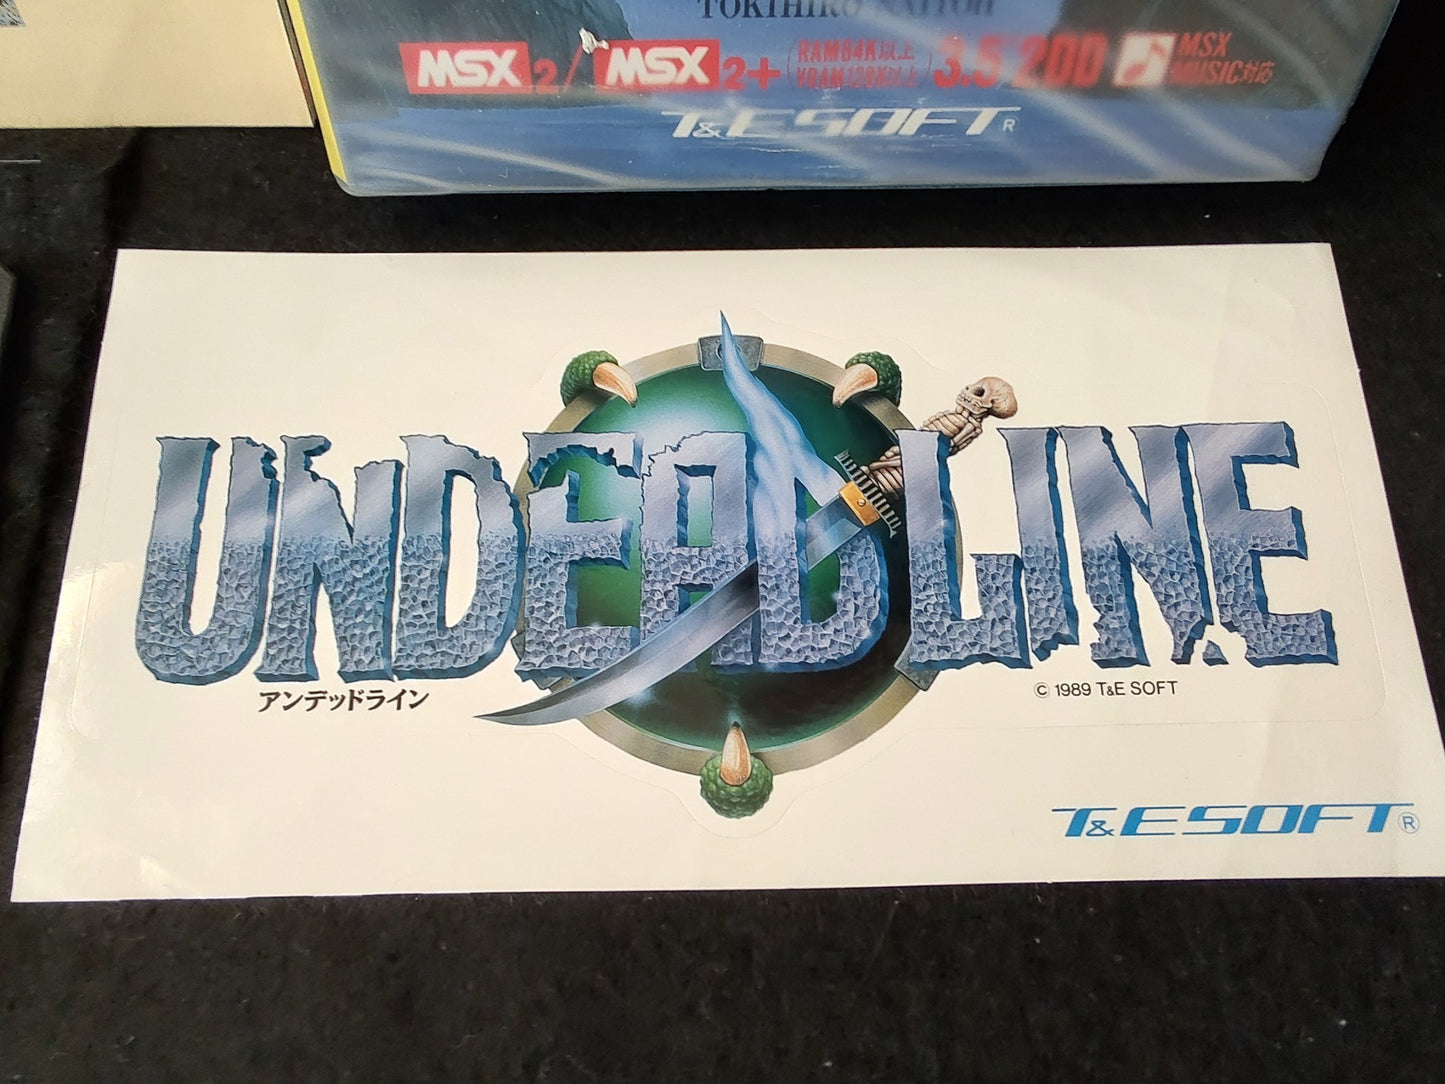 Undeadline (Undead Line) MSX/MSX PC game, Game disk, Manual, Box, Working-g0209-